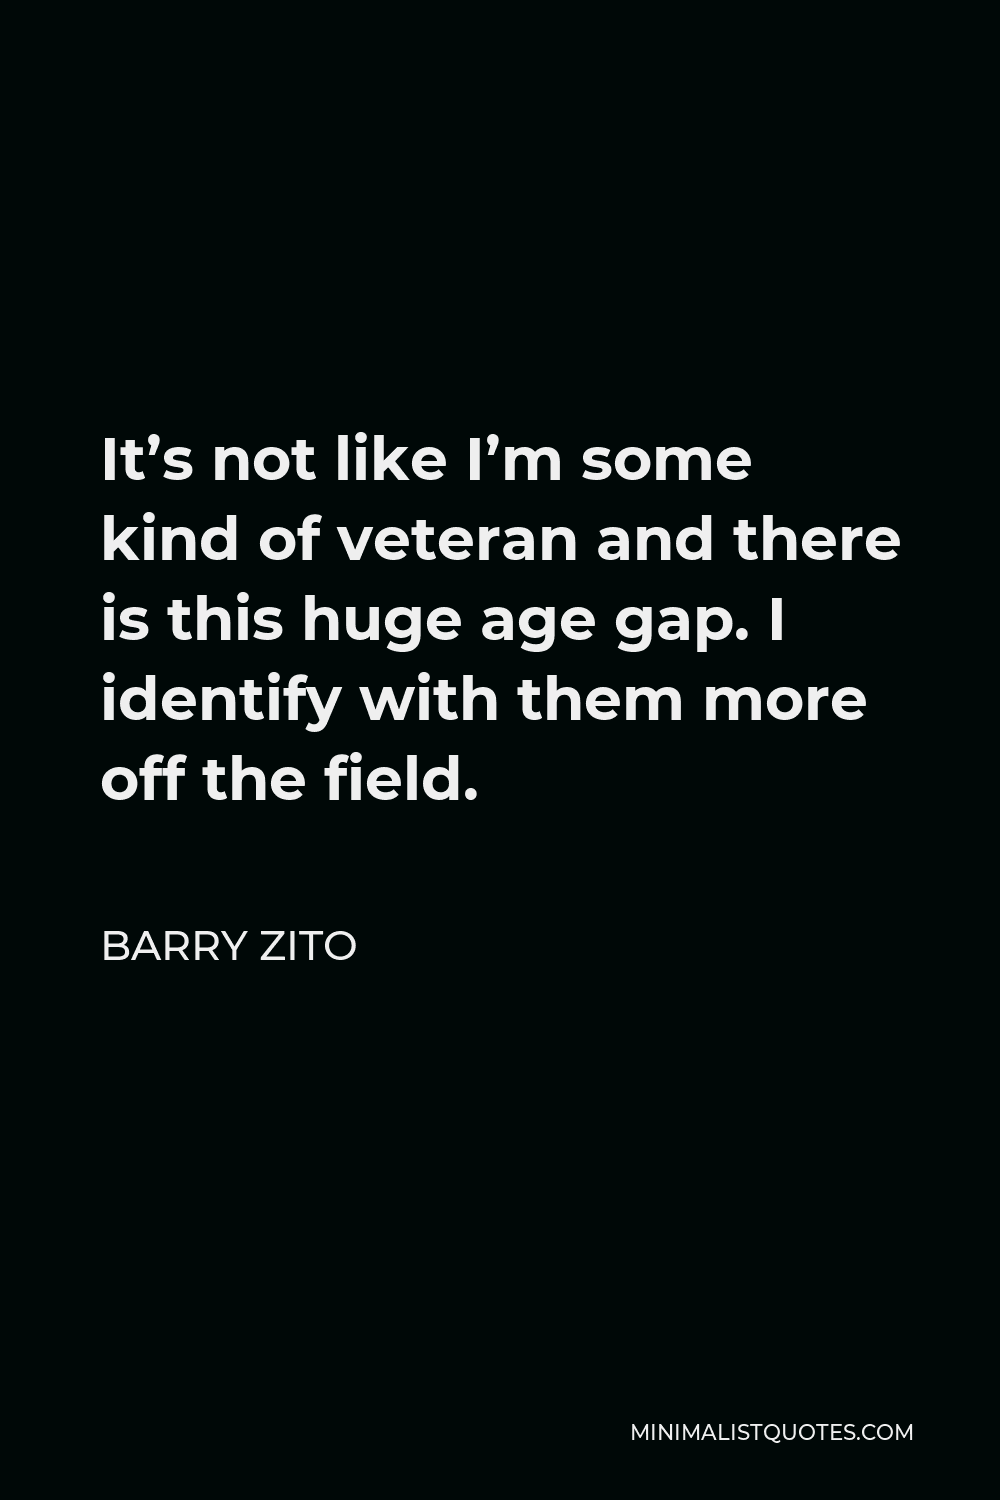 Barry Zito Quote - It’s not like I’m some kind of veteran and there is this huge age gap. I identify with them more off the field.